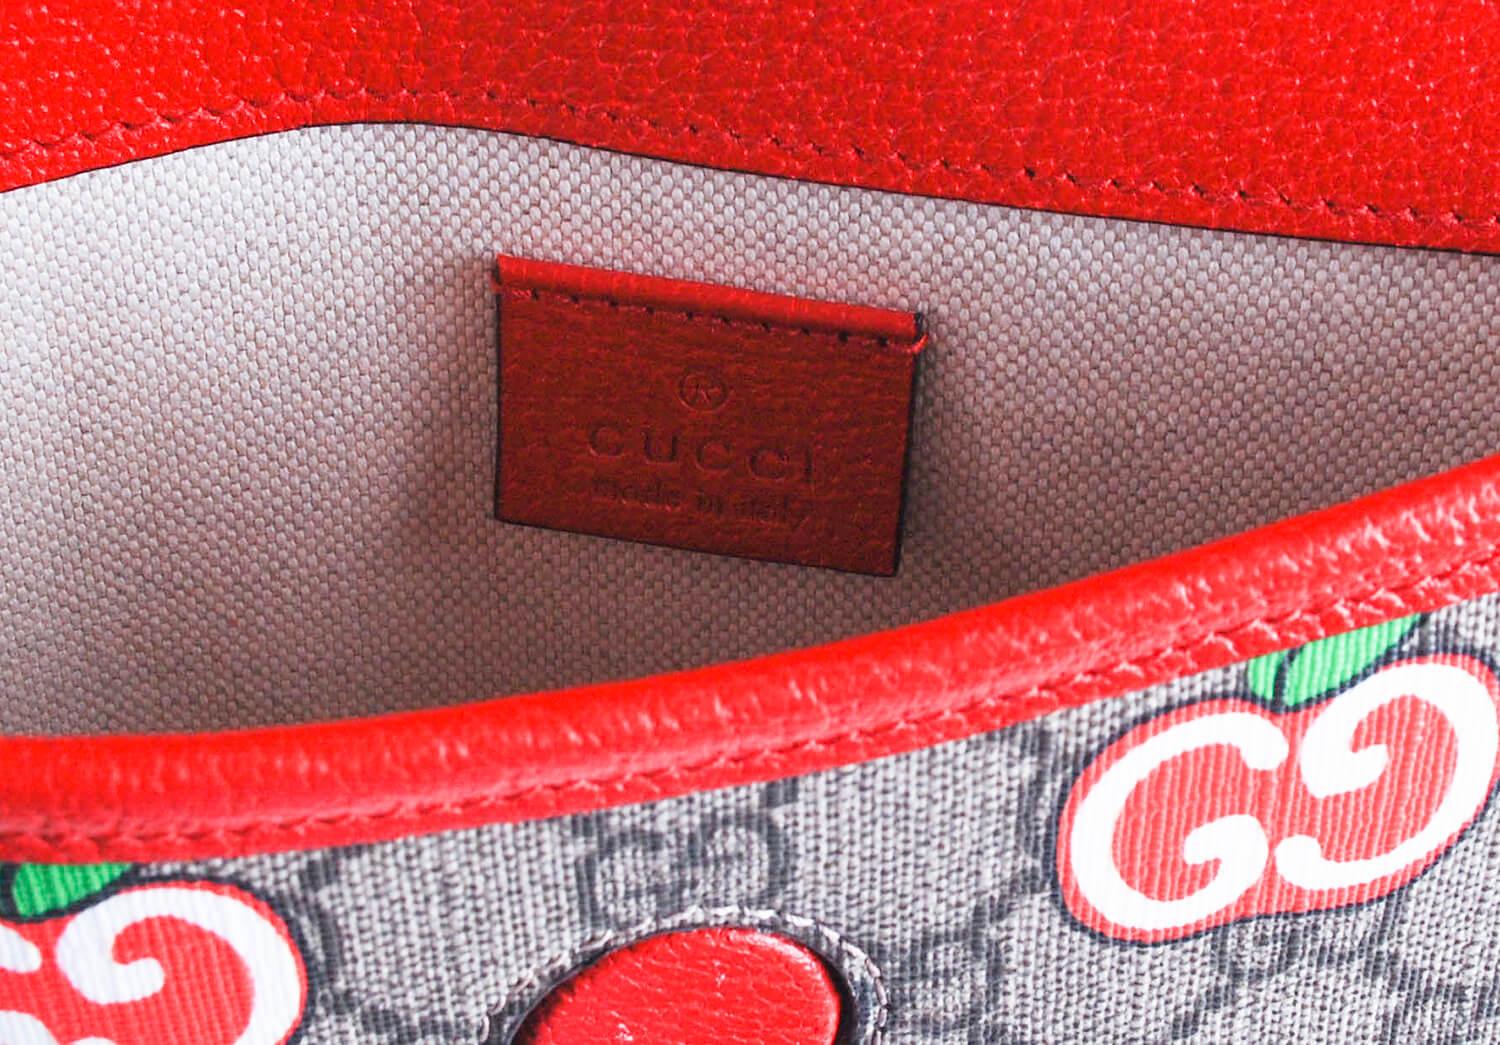  New Gucci GG Supreme Apple Print Women Waist Bag Leather Details S044 In New Condition For Sale In Kaunas, LT